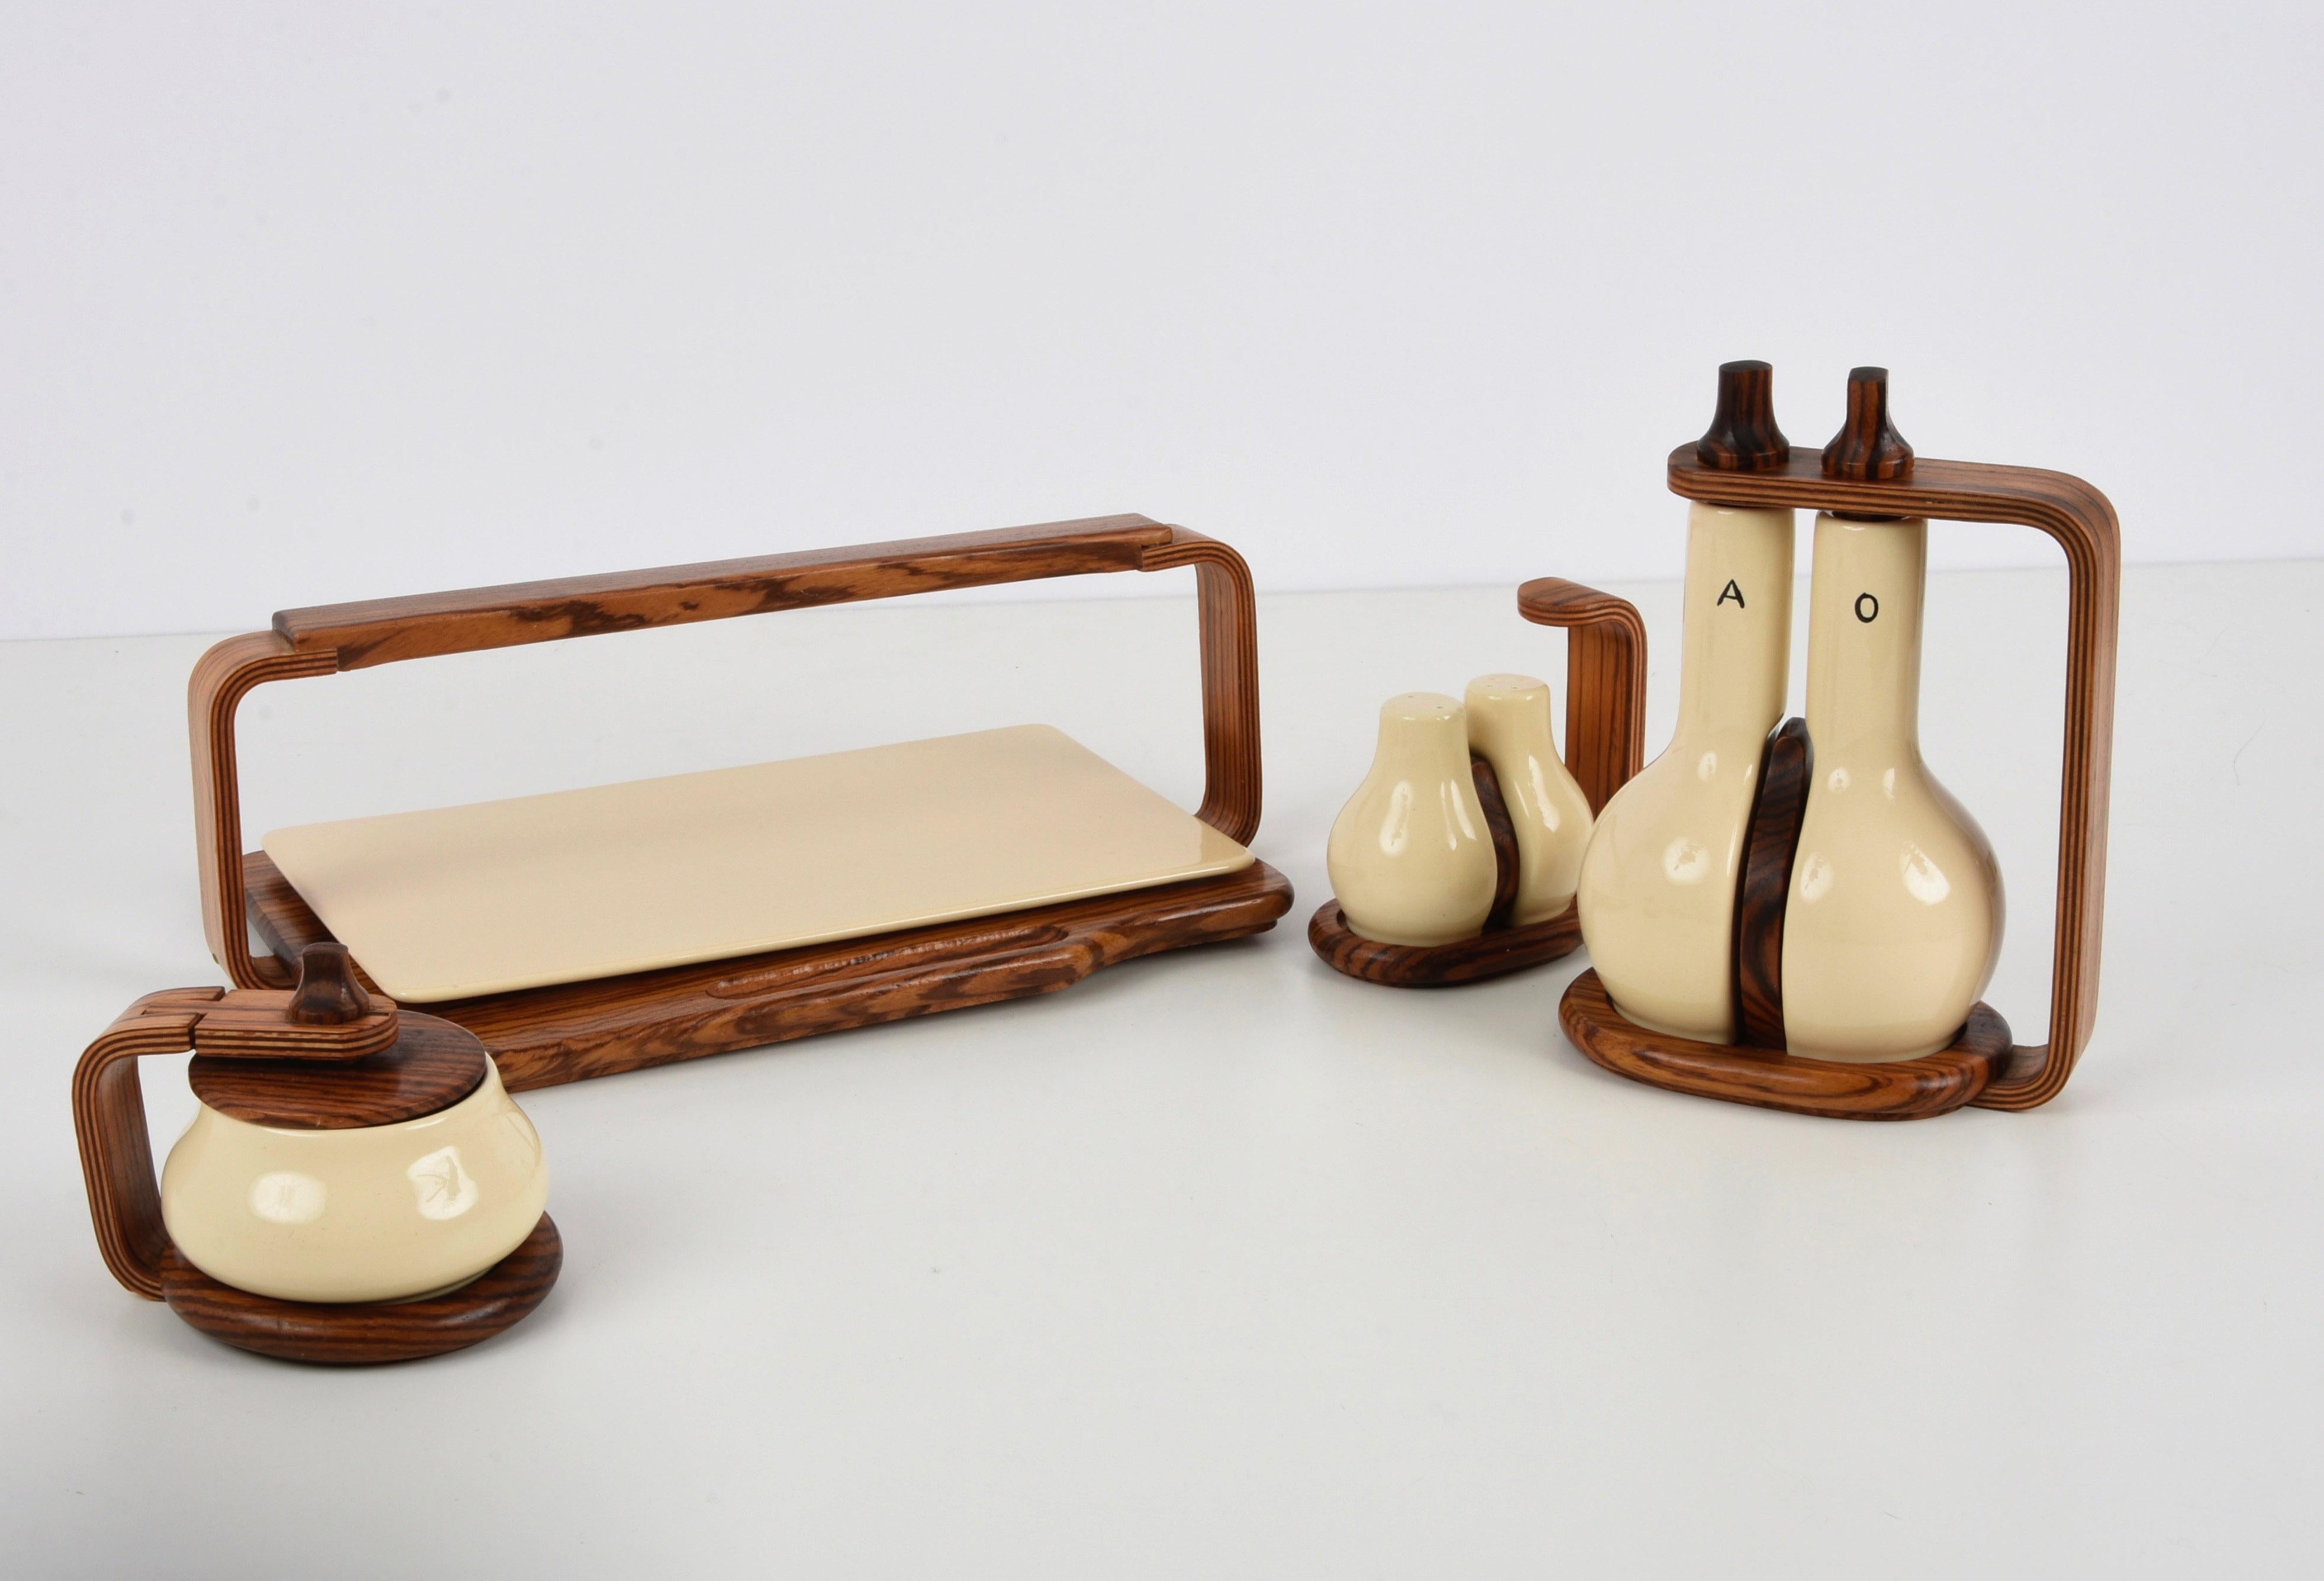 Beautiful midcentury white ceramic and teak tableware. This fantastic piece was designed by Artek in Alvar Aalto style during the 1970s.

An enchanting set, that includes:
a teak and ceramic cheese tray;
a salt and pepper shakers set;
a set of